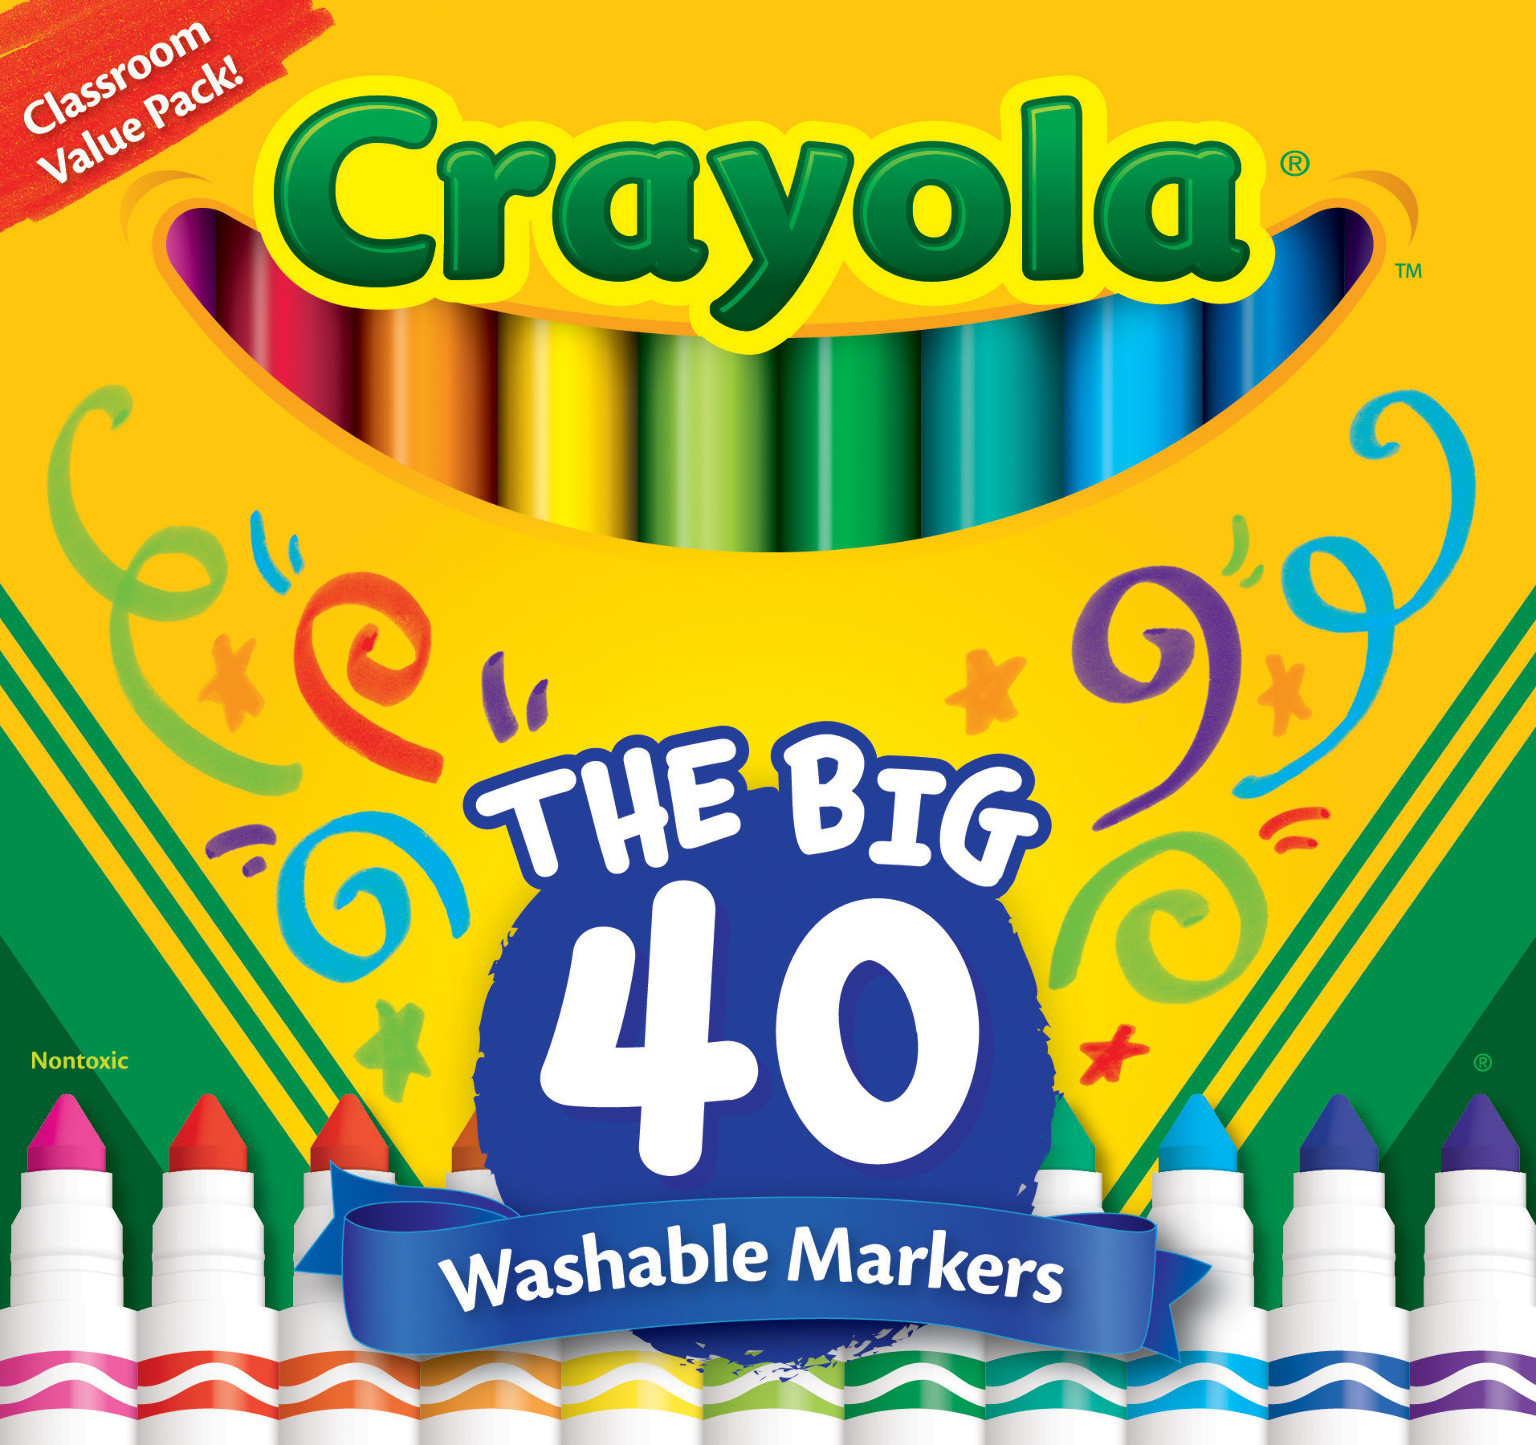 Ultra-Clean Washable Crayons, Large, 8 Colors/Box  Emergent Safety Supply:  PPE, Work Gloves, Clothing, Glasses